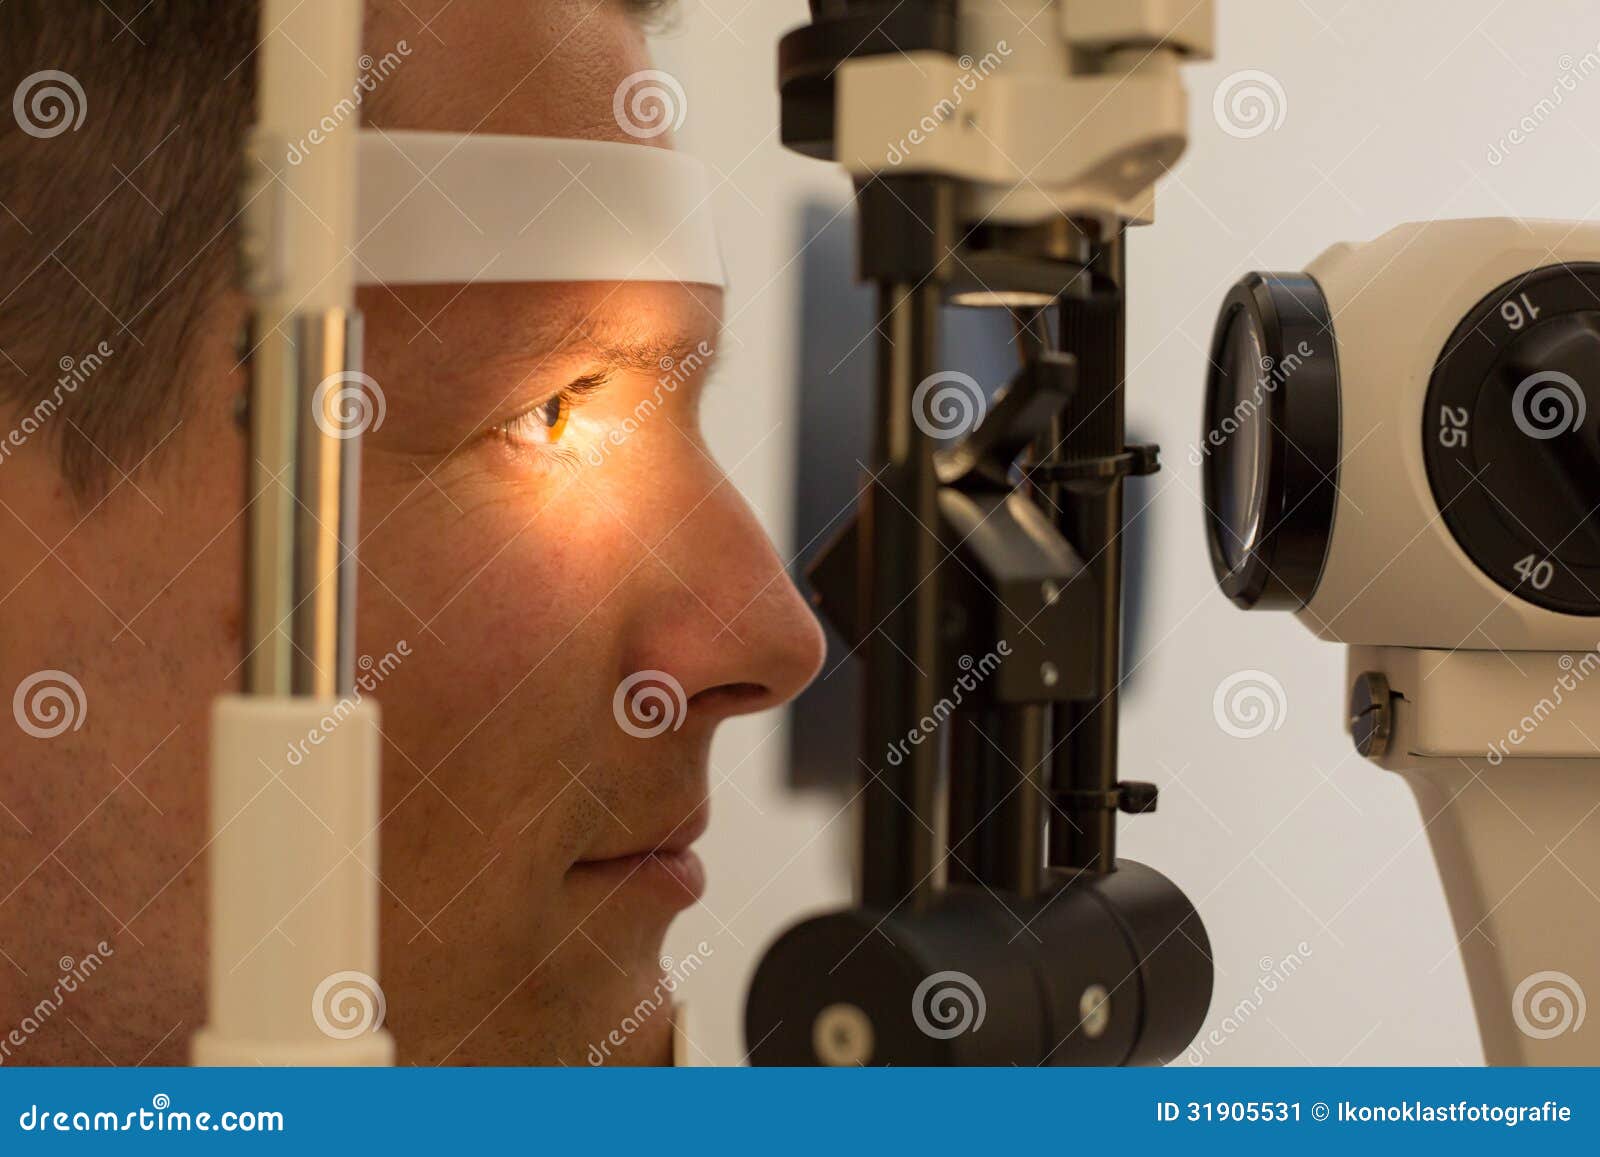 patient at slit lamp of optician or optometrist